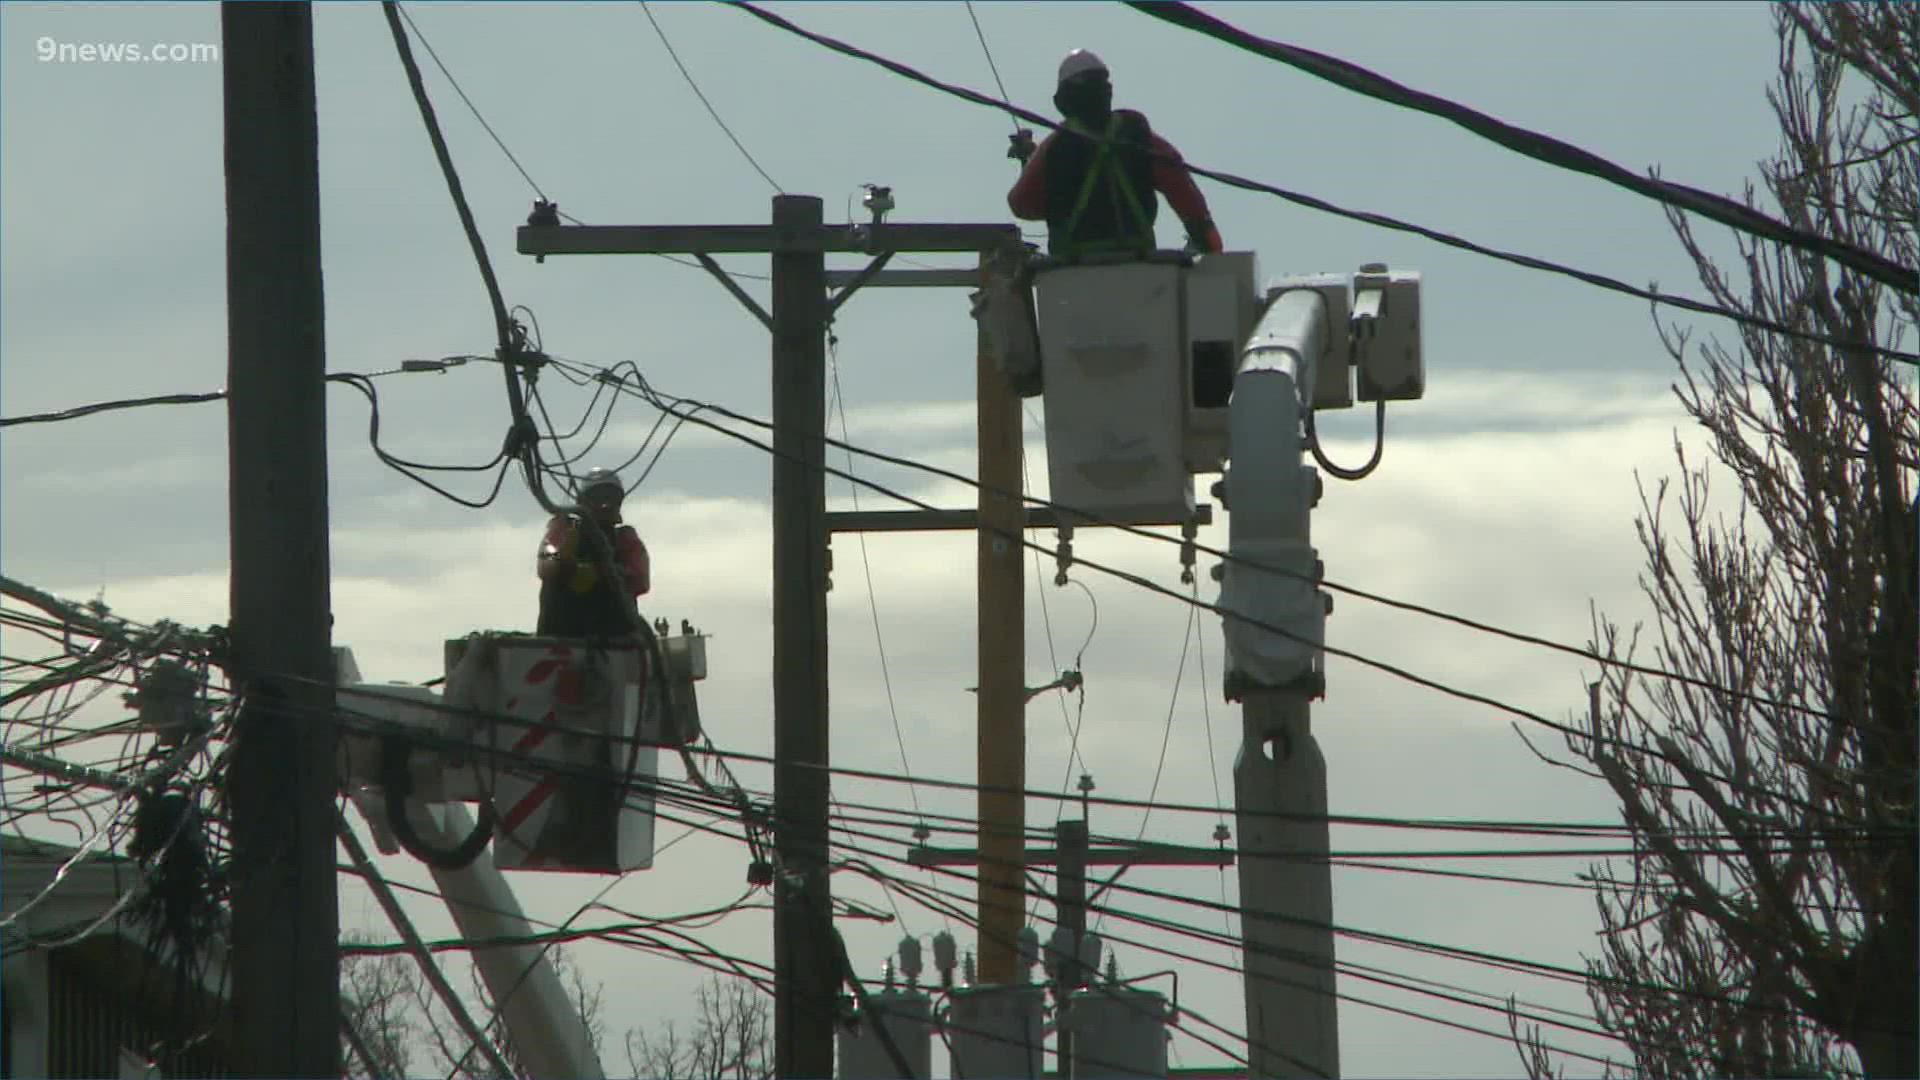 Xcel said they're focusing on restoring larger outages first, and will then move to smaller ones.